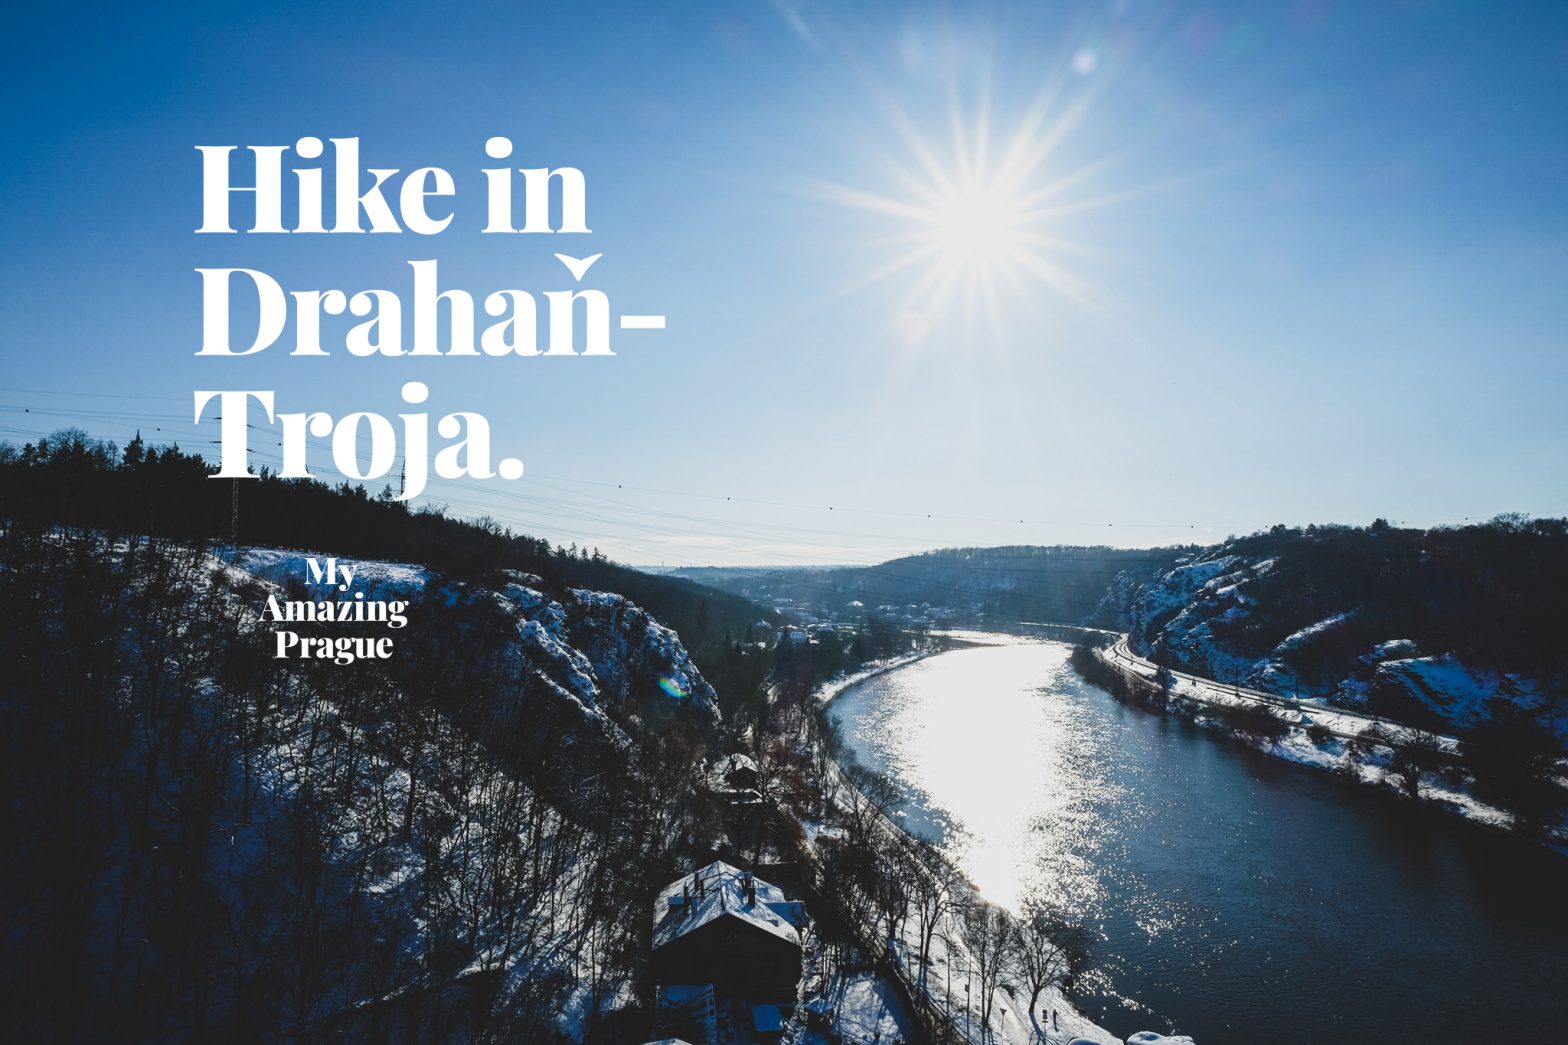 HIKE #5: Hiking through Drahaň-Troja nature park with mysterious vibes